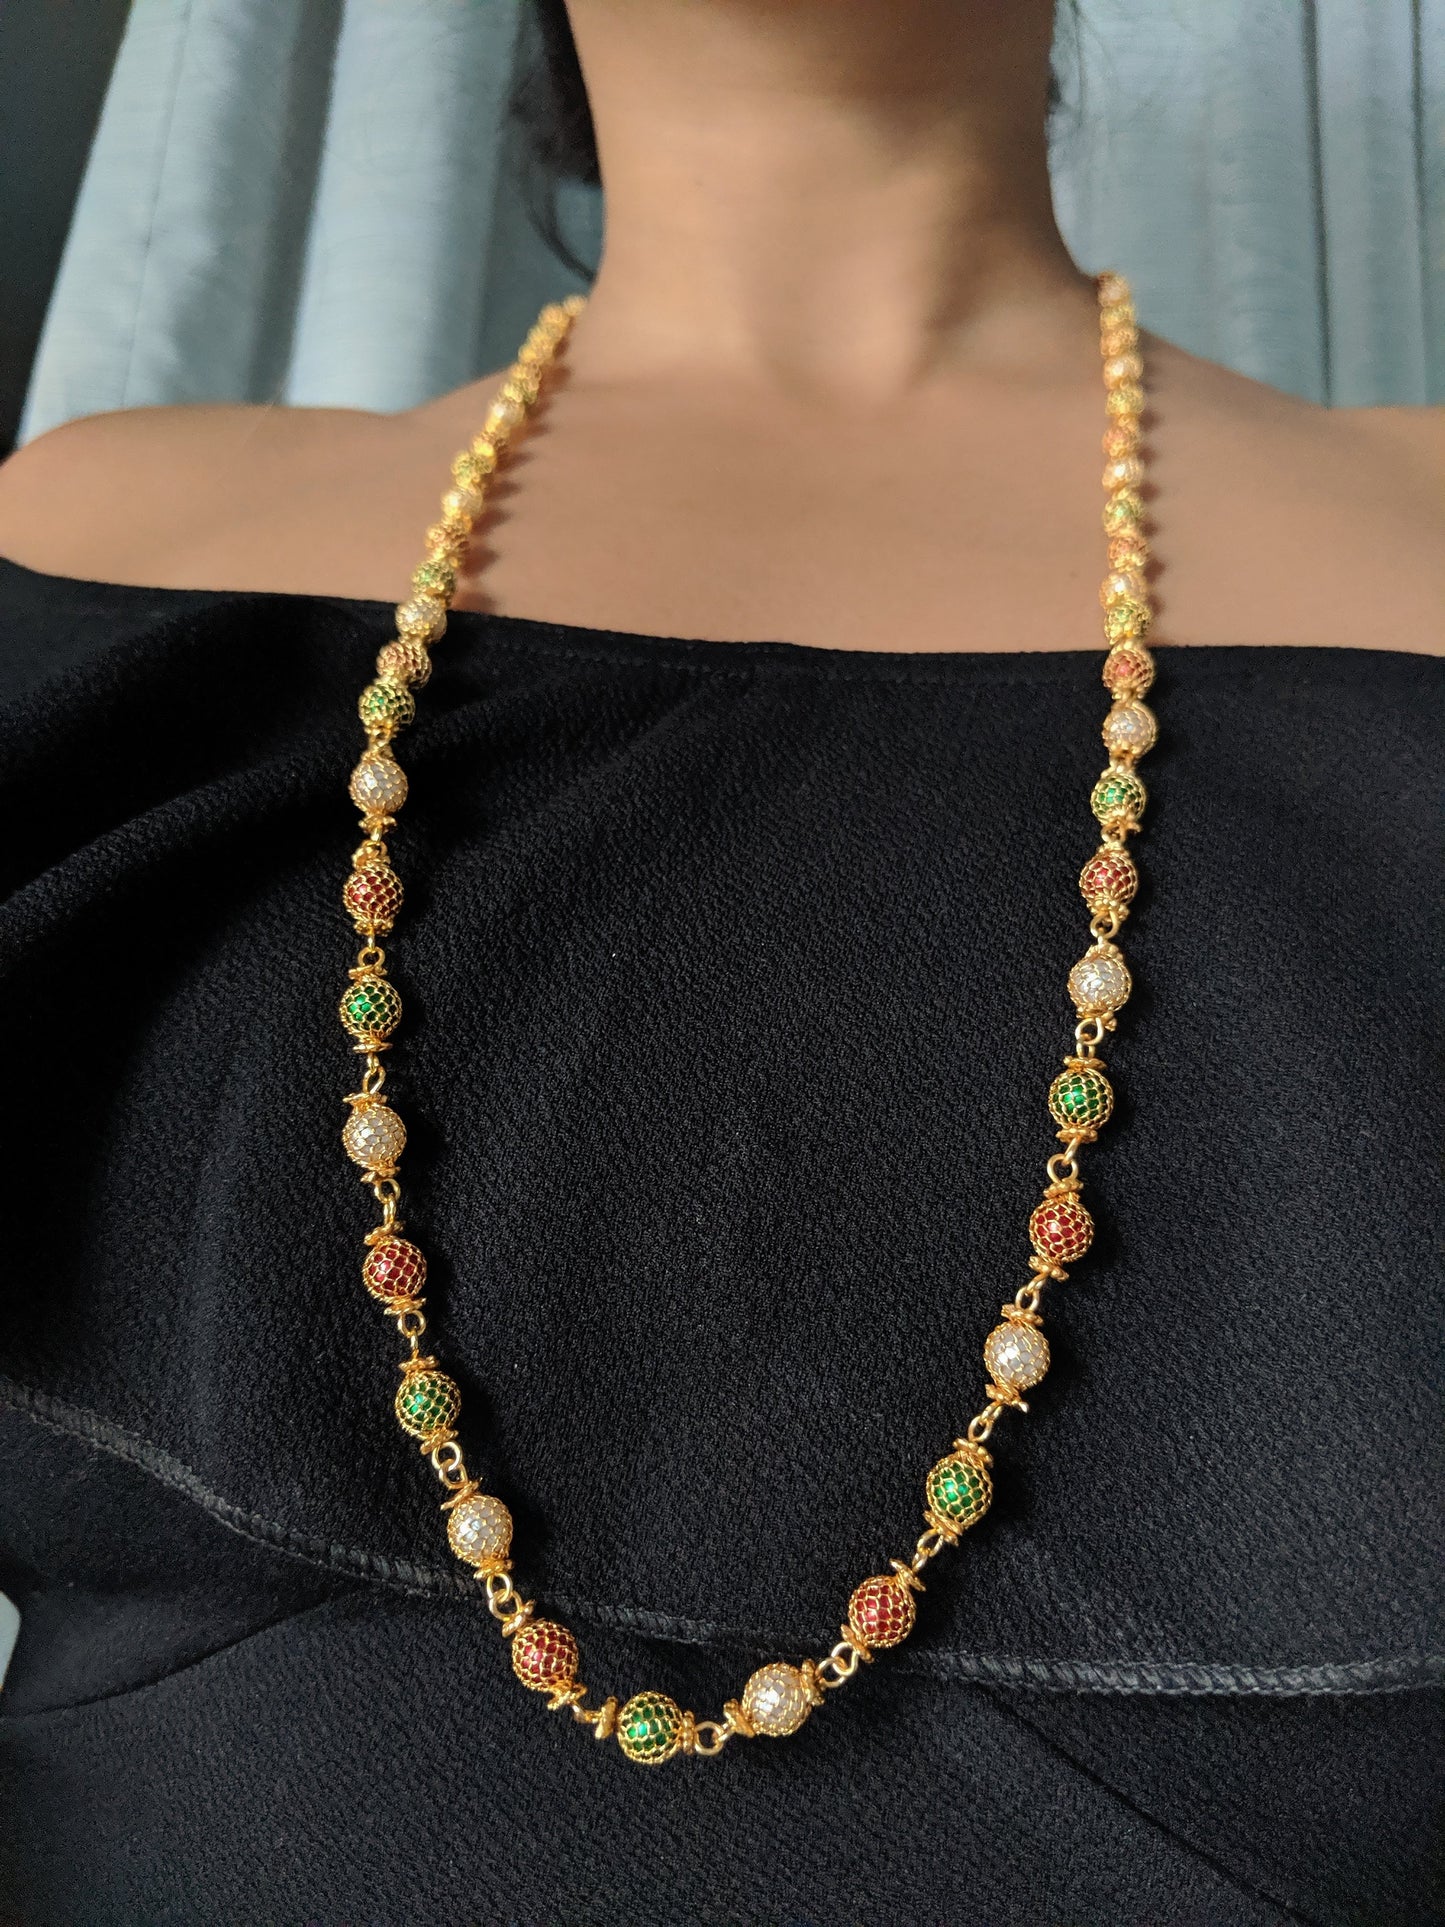 Digital Dress Room Multi-Color with White Pearl Necklace